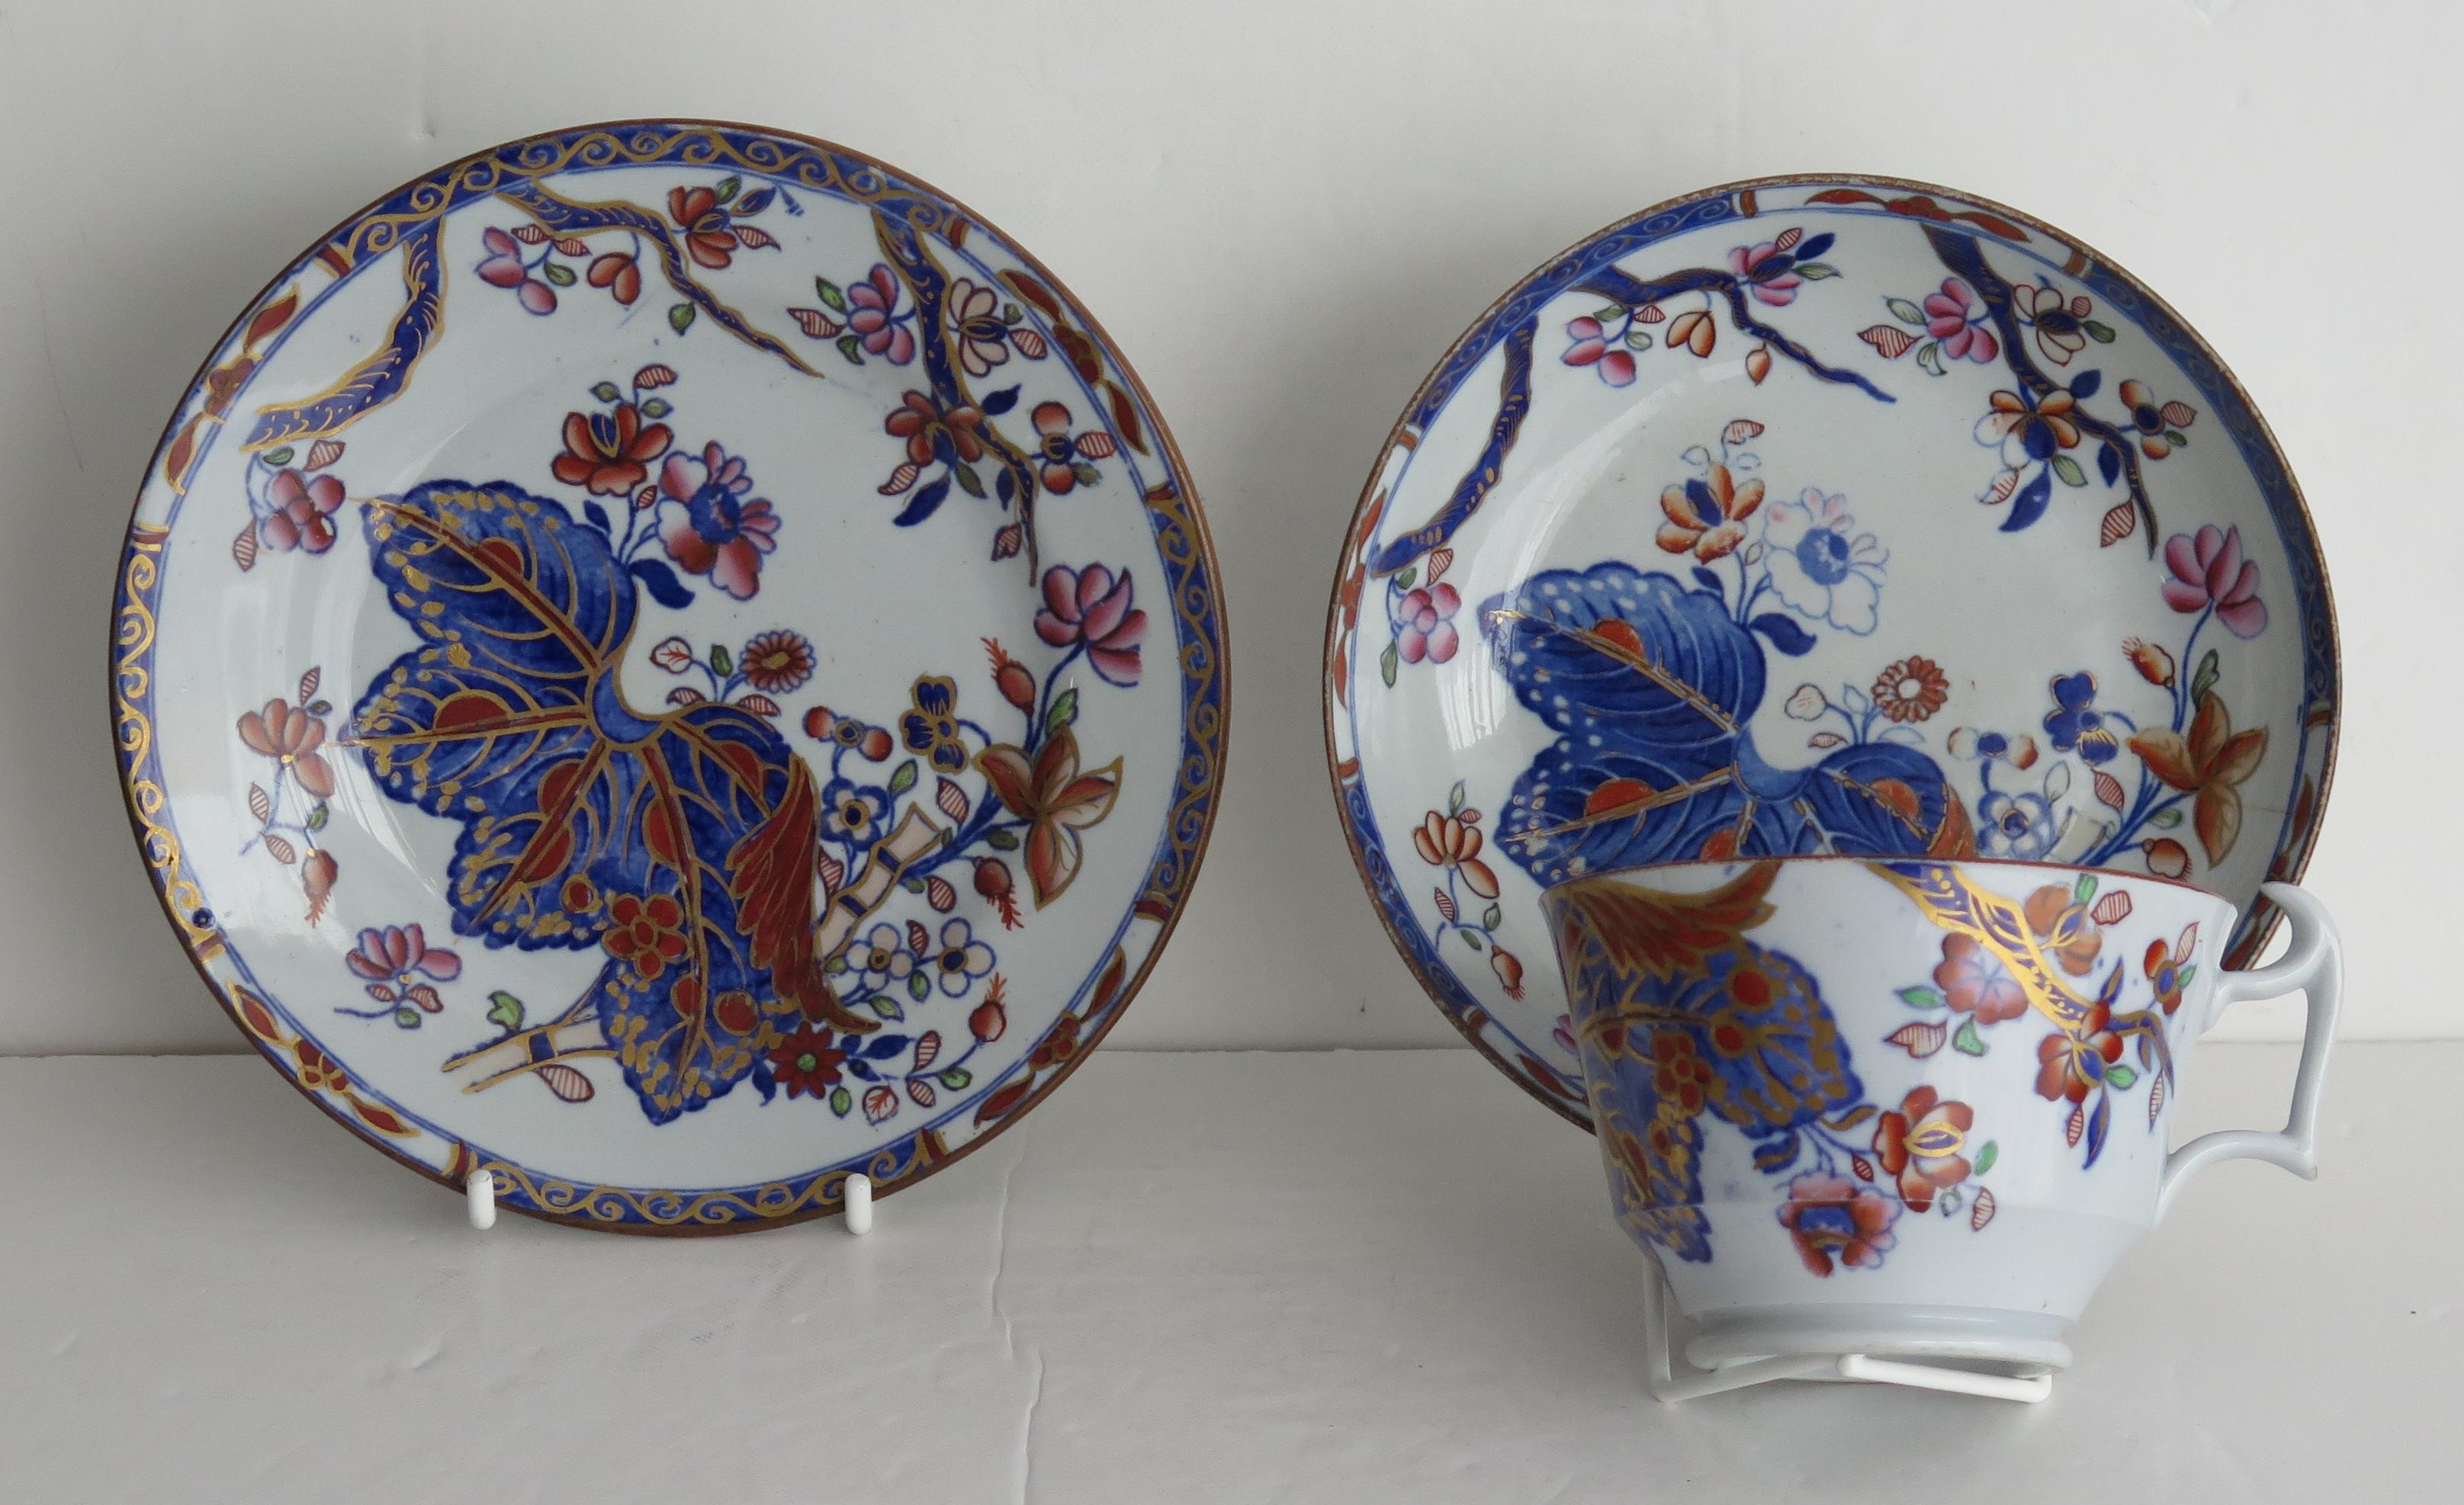 Hand-Painted Spode & Copeland Stone China Trio in Tobacco Leaf Pattern No. 2061, 19th Century